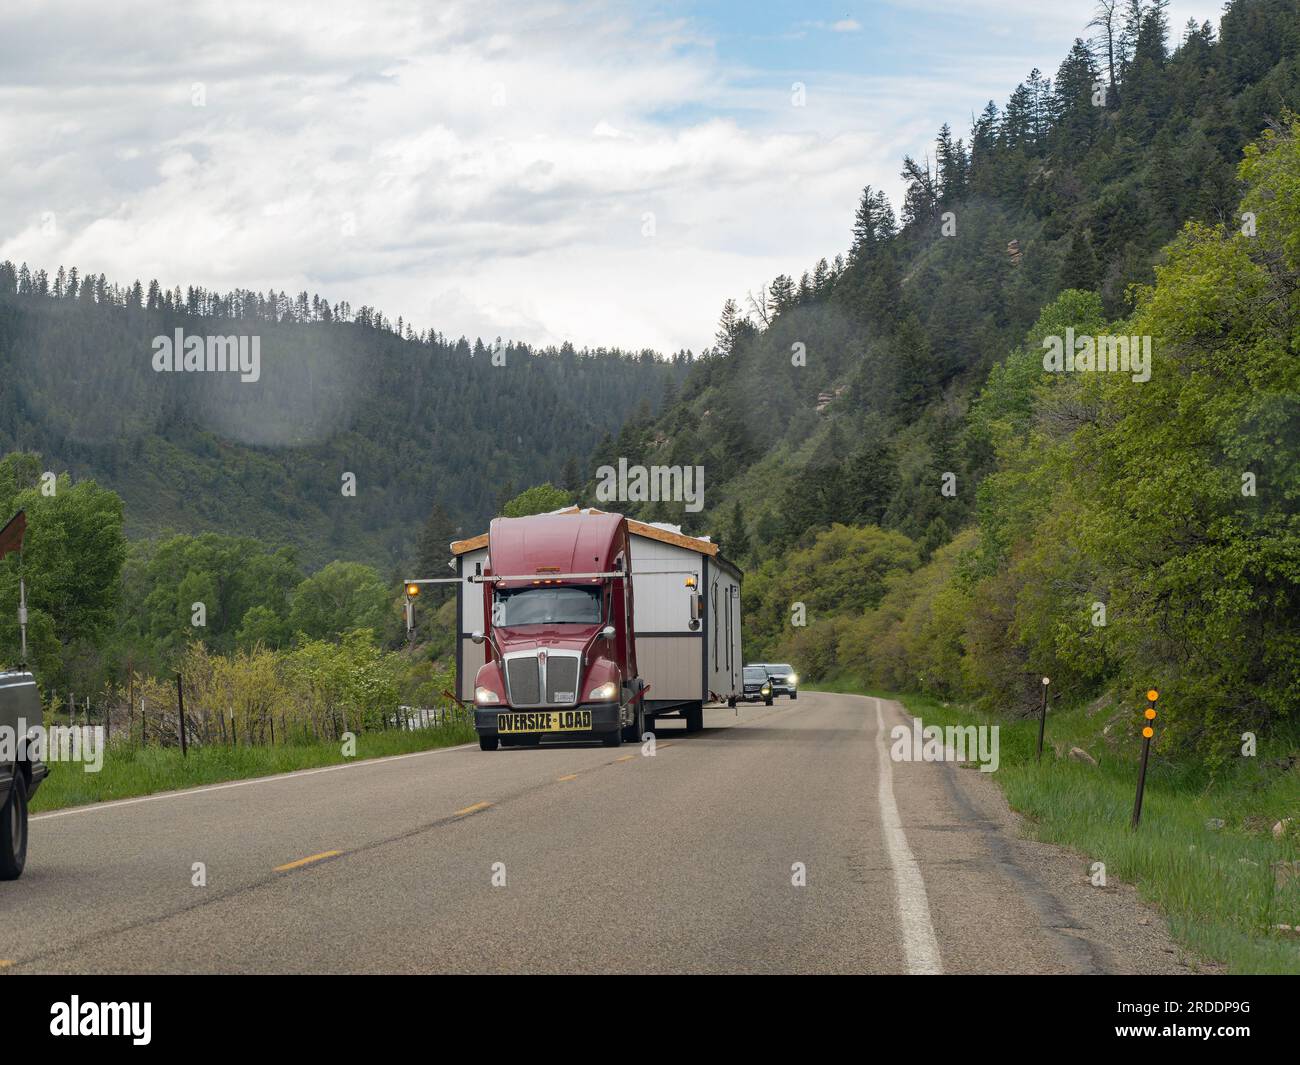 Colorado, JUN 7, 2023 - Big truck is loading with a tiny home on the road Stock Photo